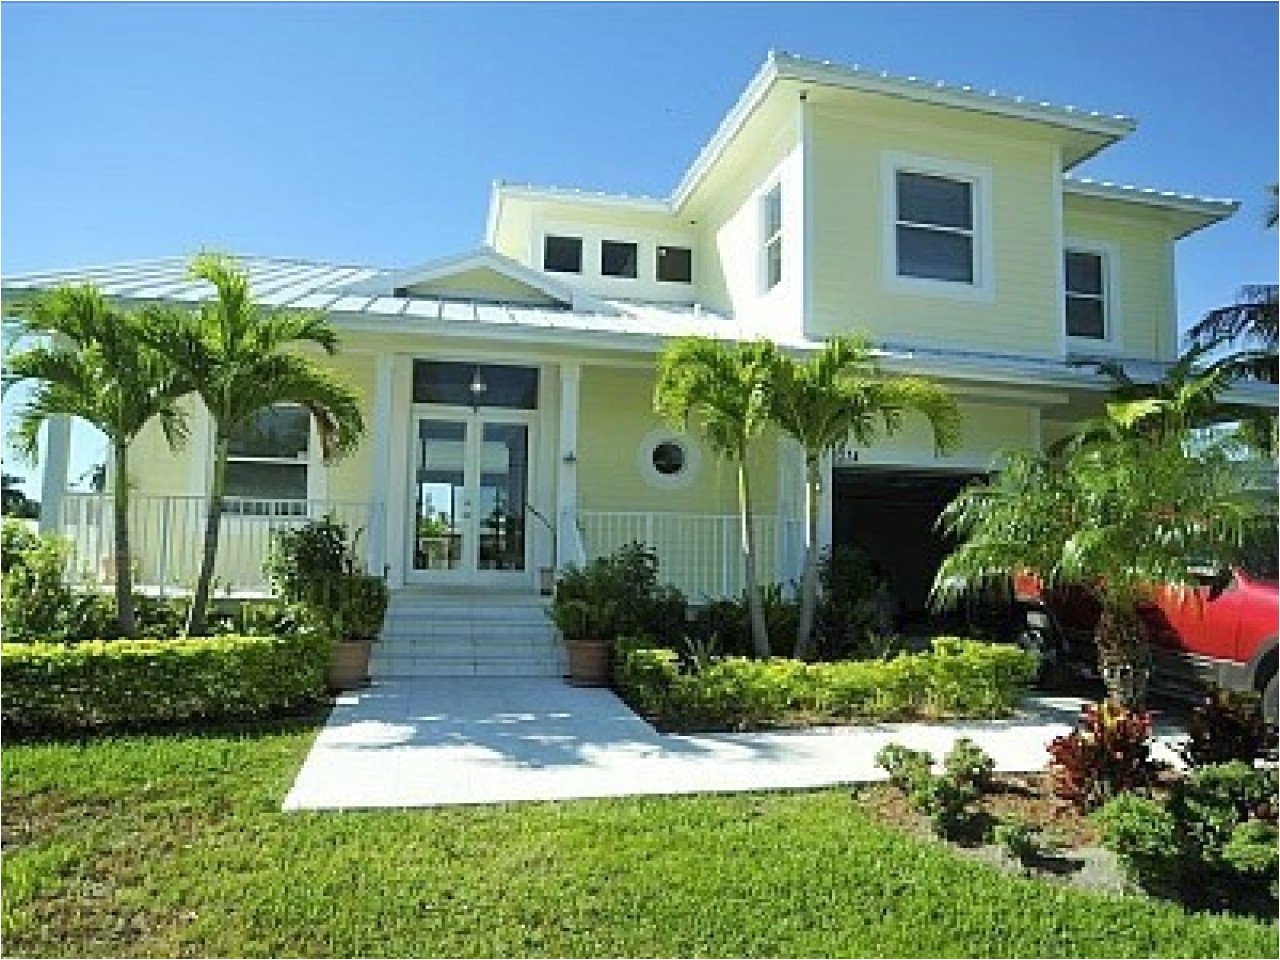 West Home Plans Key West Style Homes House Plans Style Key West Cottages